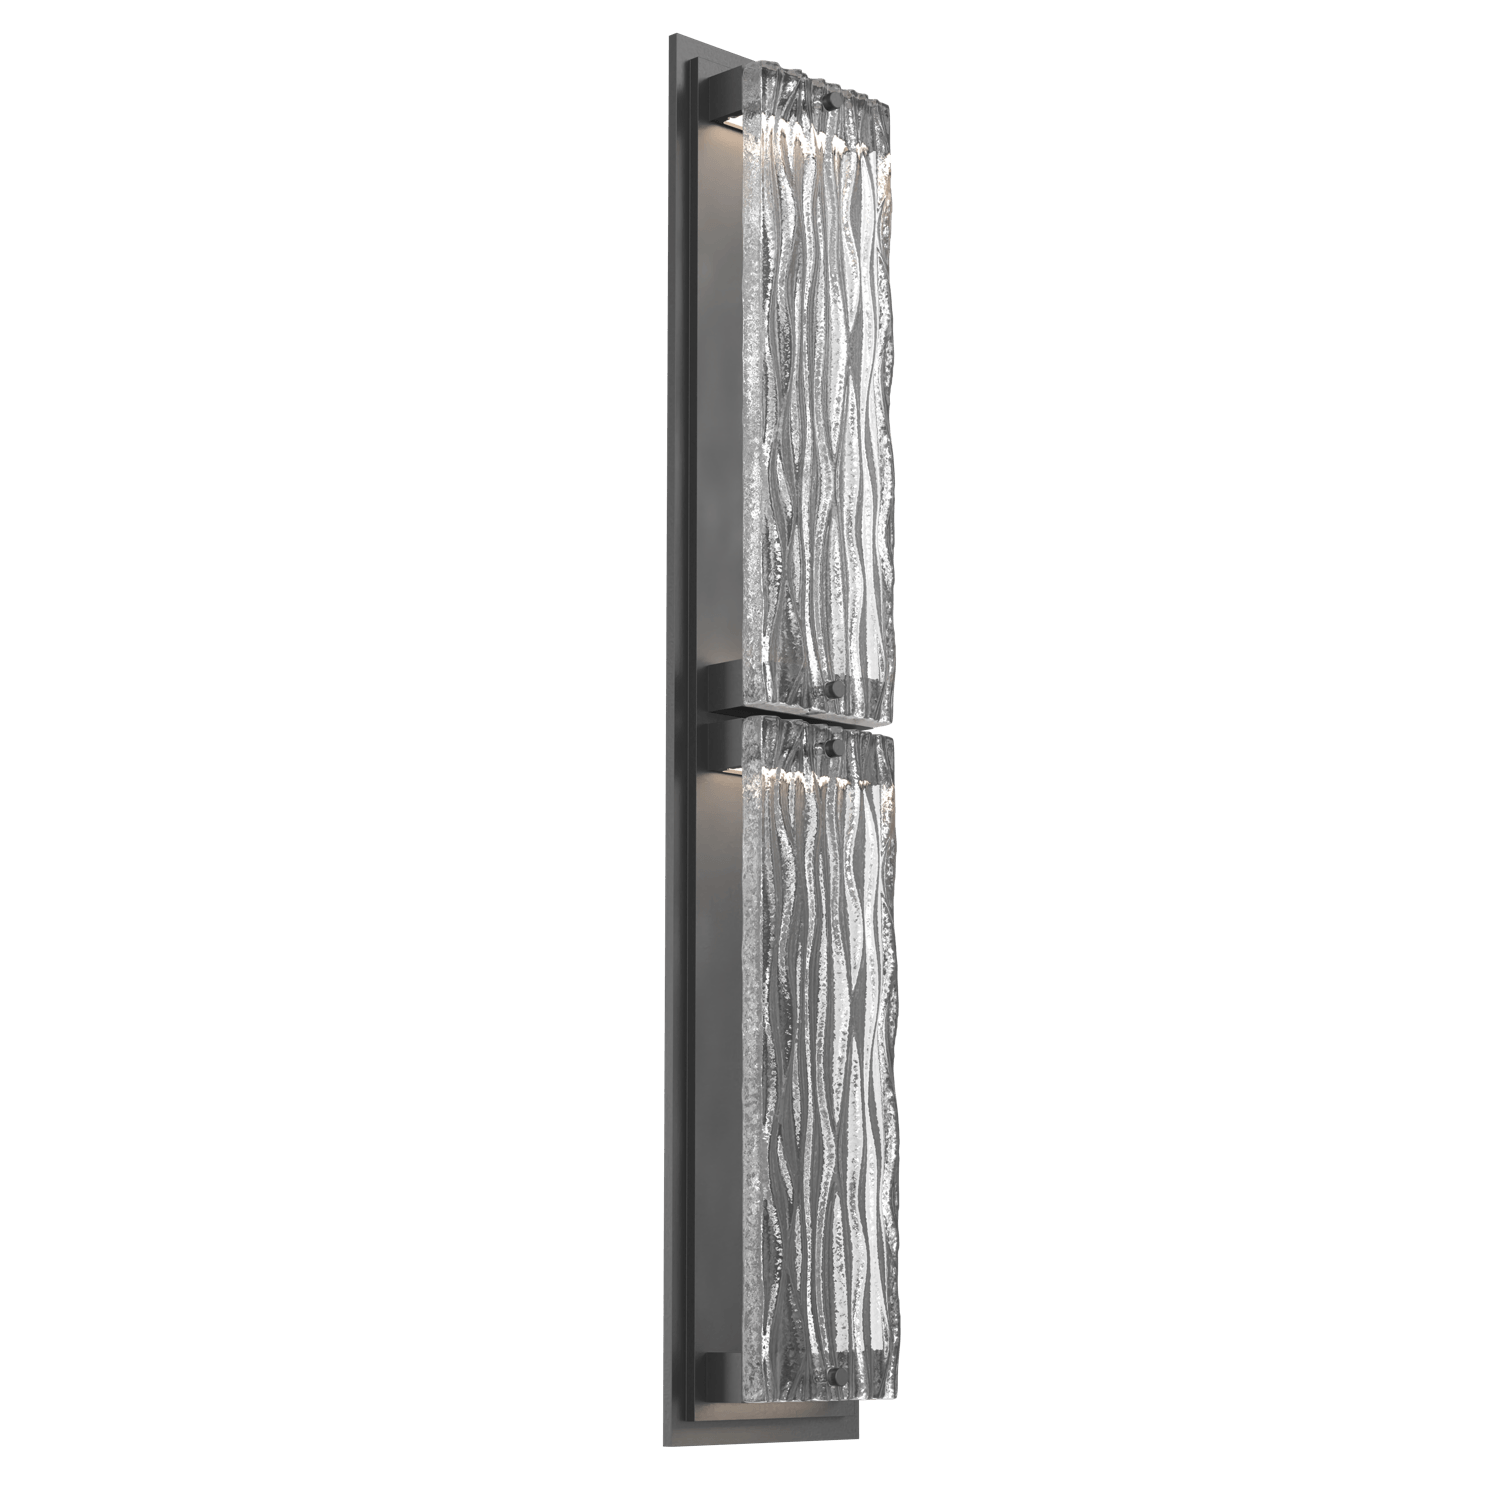 ODB0090-02-AG-TT-Hammerton-Studio-Tabulo-28-inch-outdoor-sconce-with-argento-grey-finish-and-clear-tidal-cast-glass-shade-and-LED-lamping